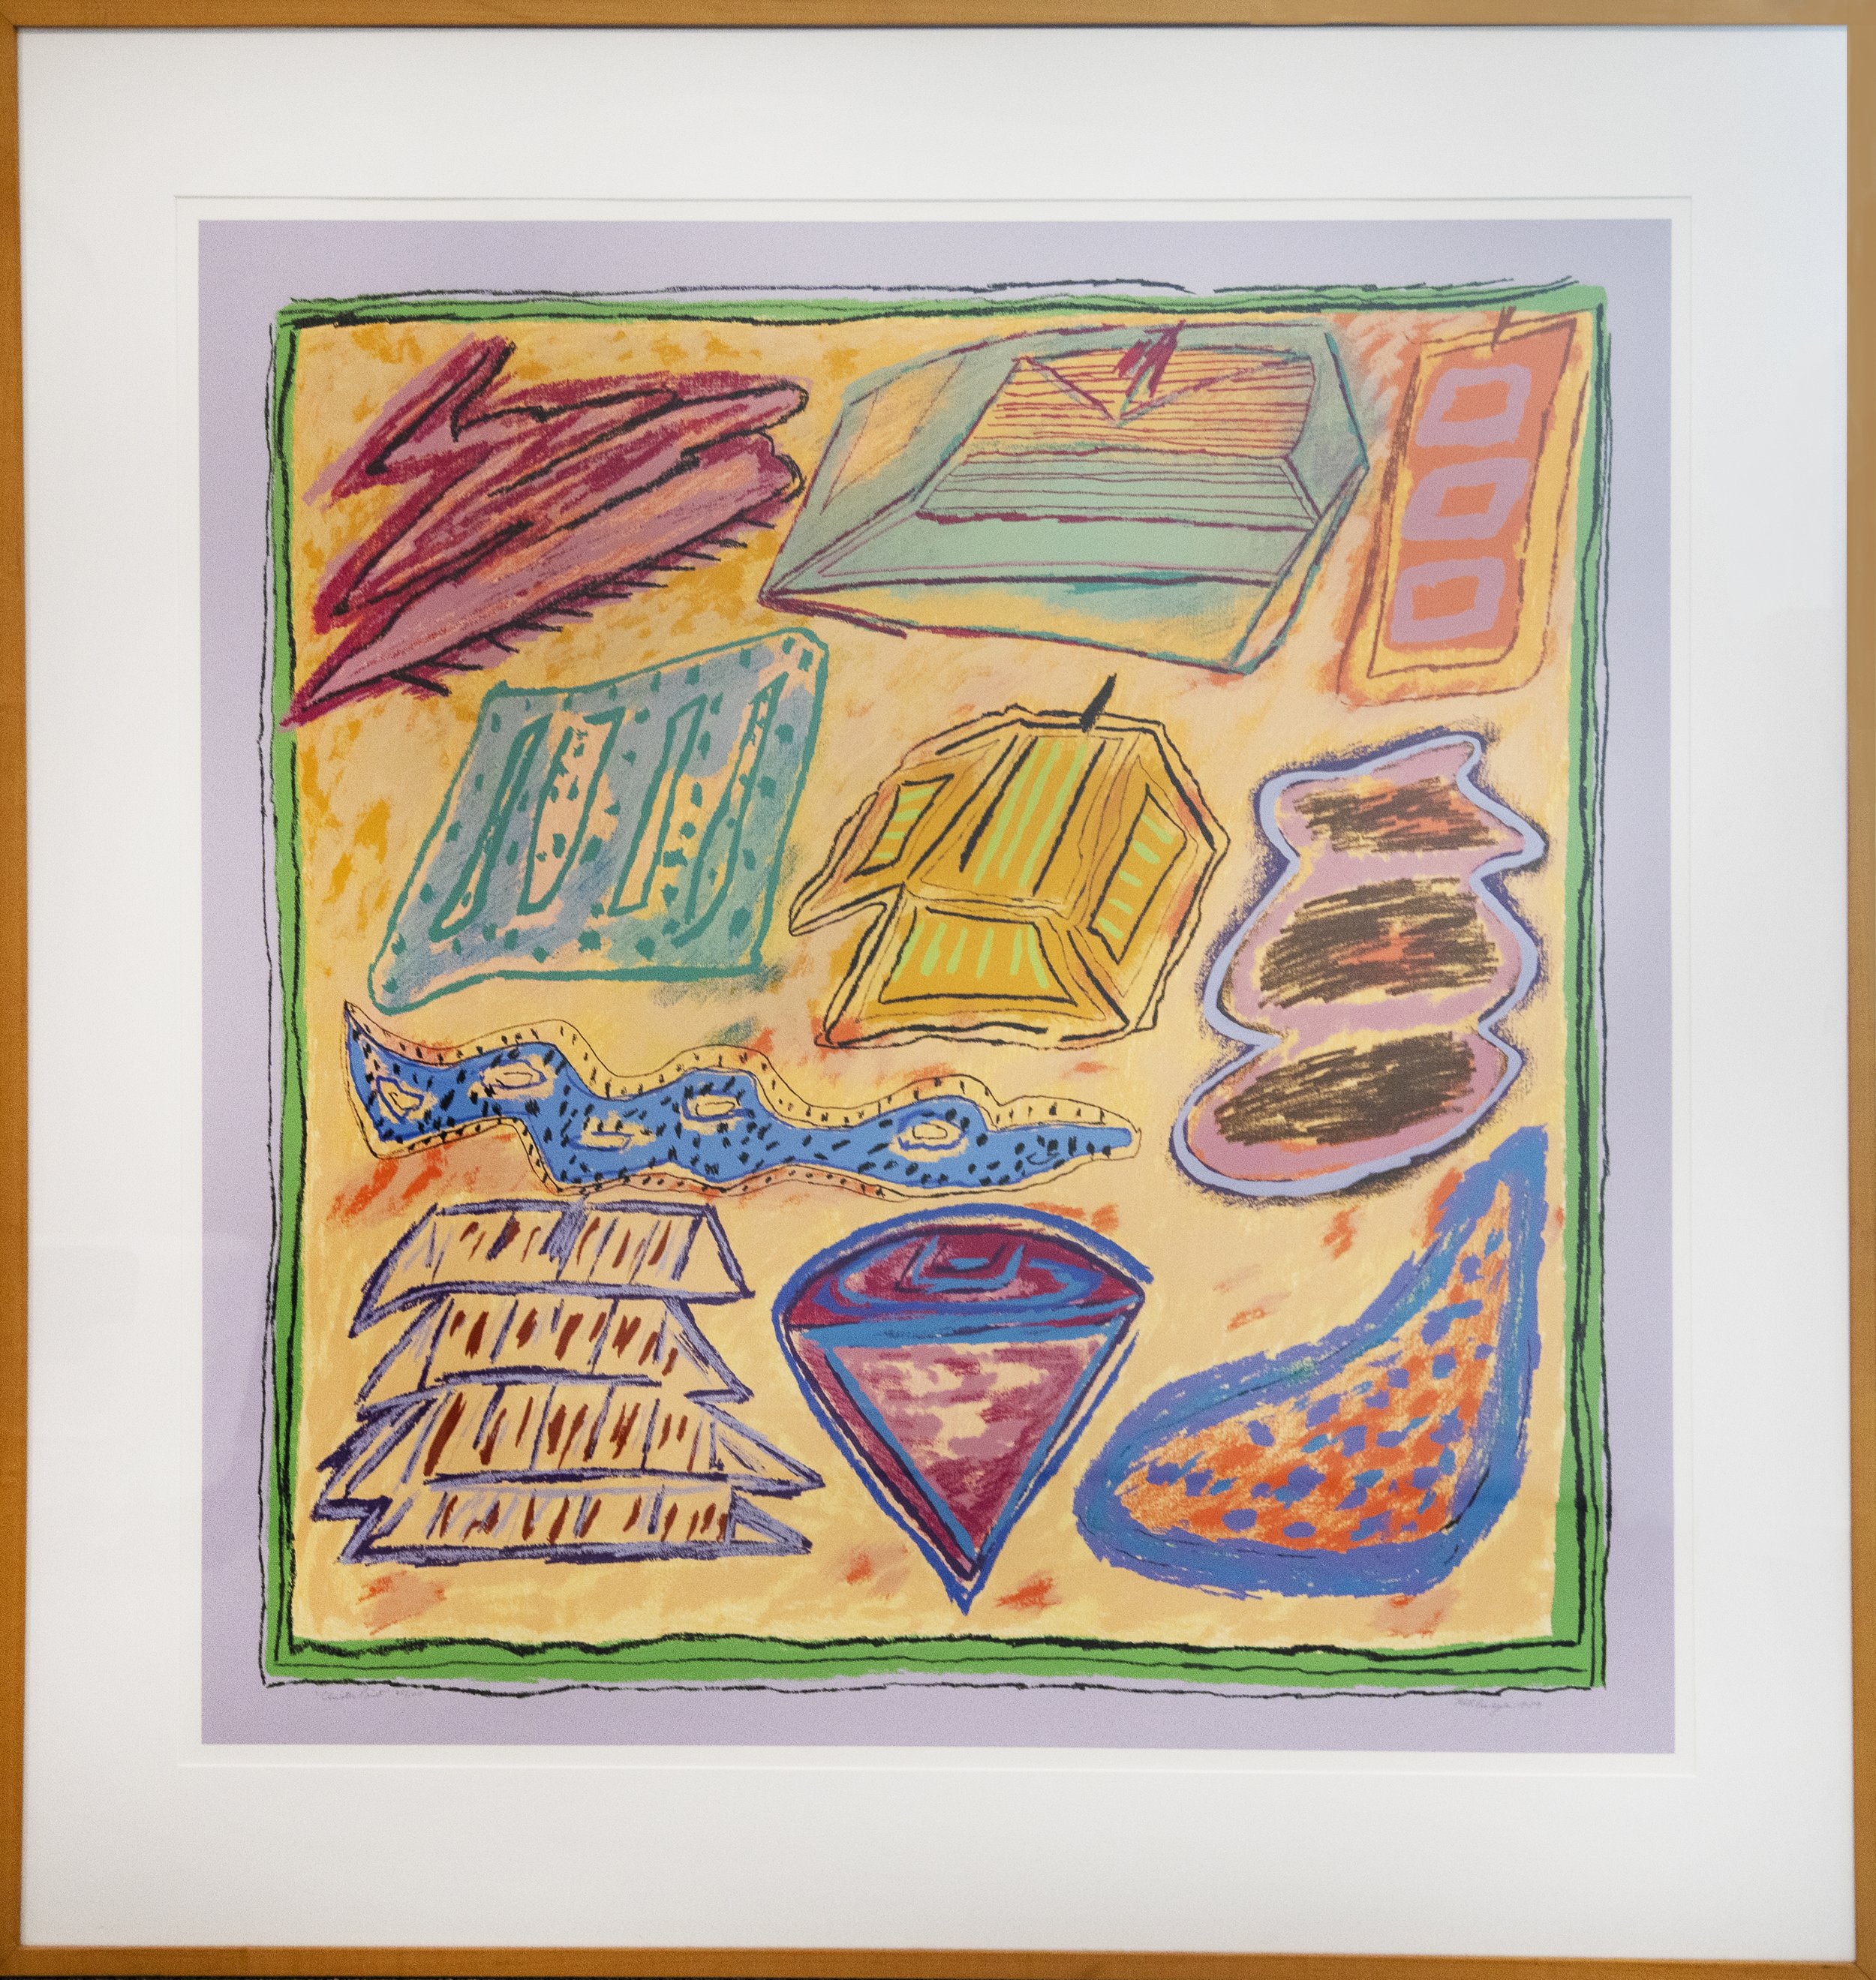   Cluster Print, 1989,   serigraph, pencil-signed, titled, dated and numbered 85/100, sight 37 x 37 in.  Framed 46 1/2 x 46 in.  SOLD 